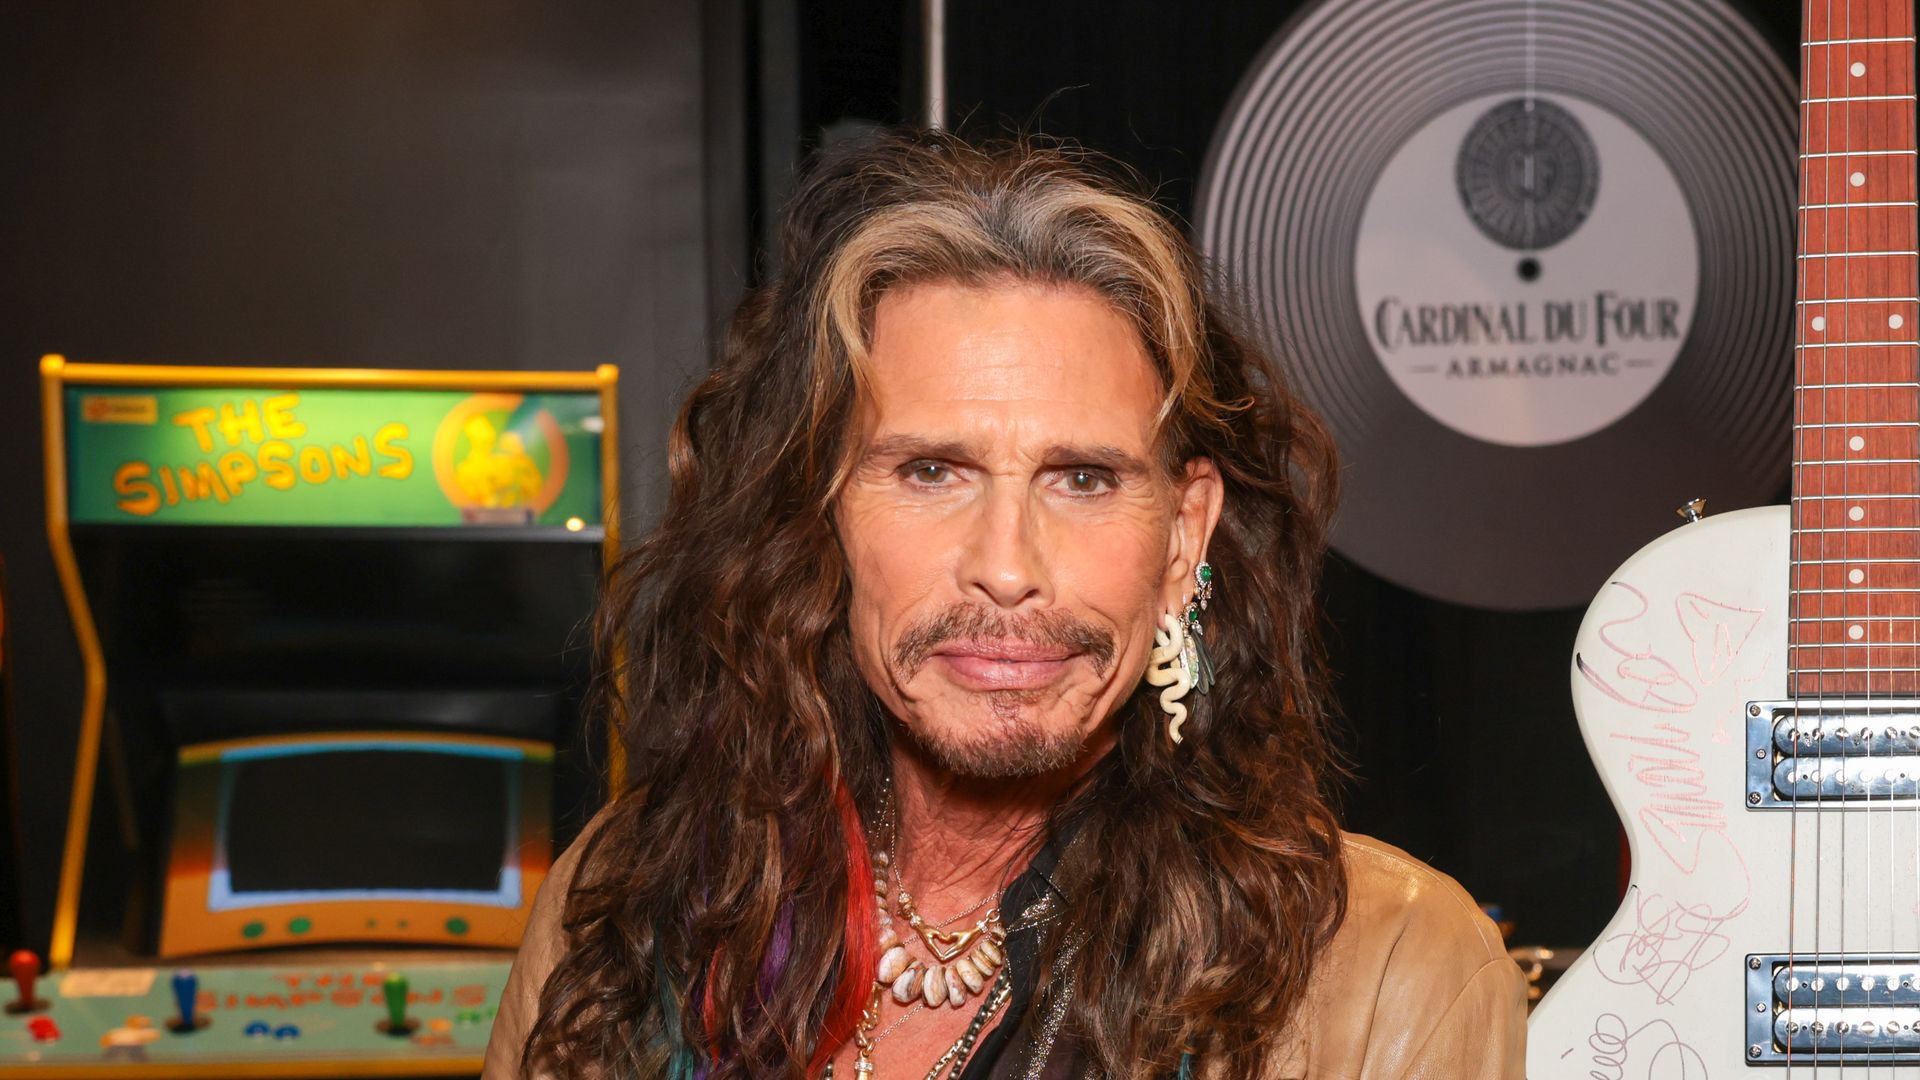 Steven Tyler attends the GBK Brand Bar Back Stage during Rock & Roll Hall of Fame